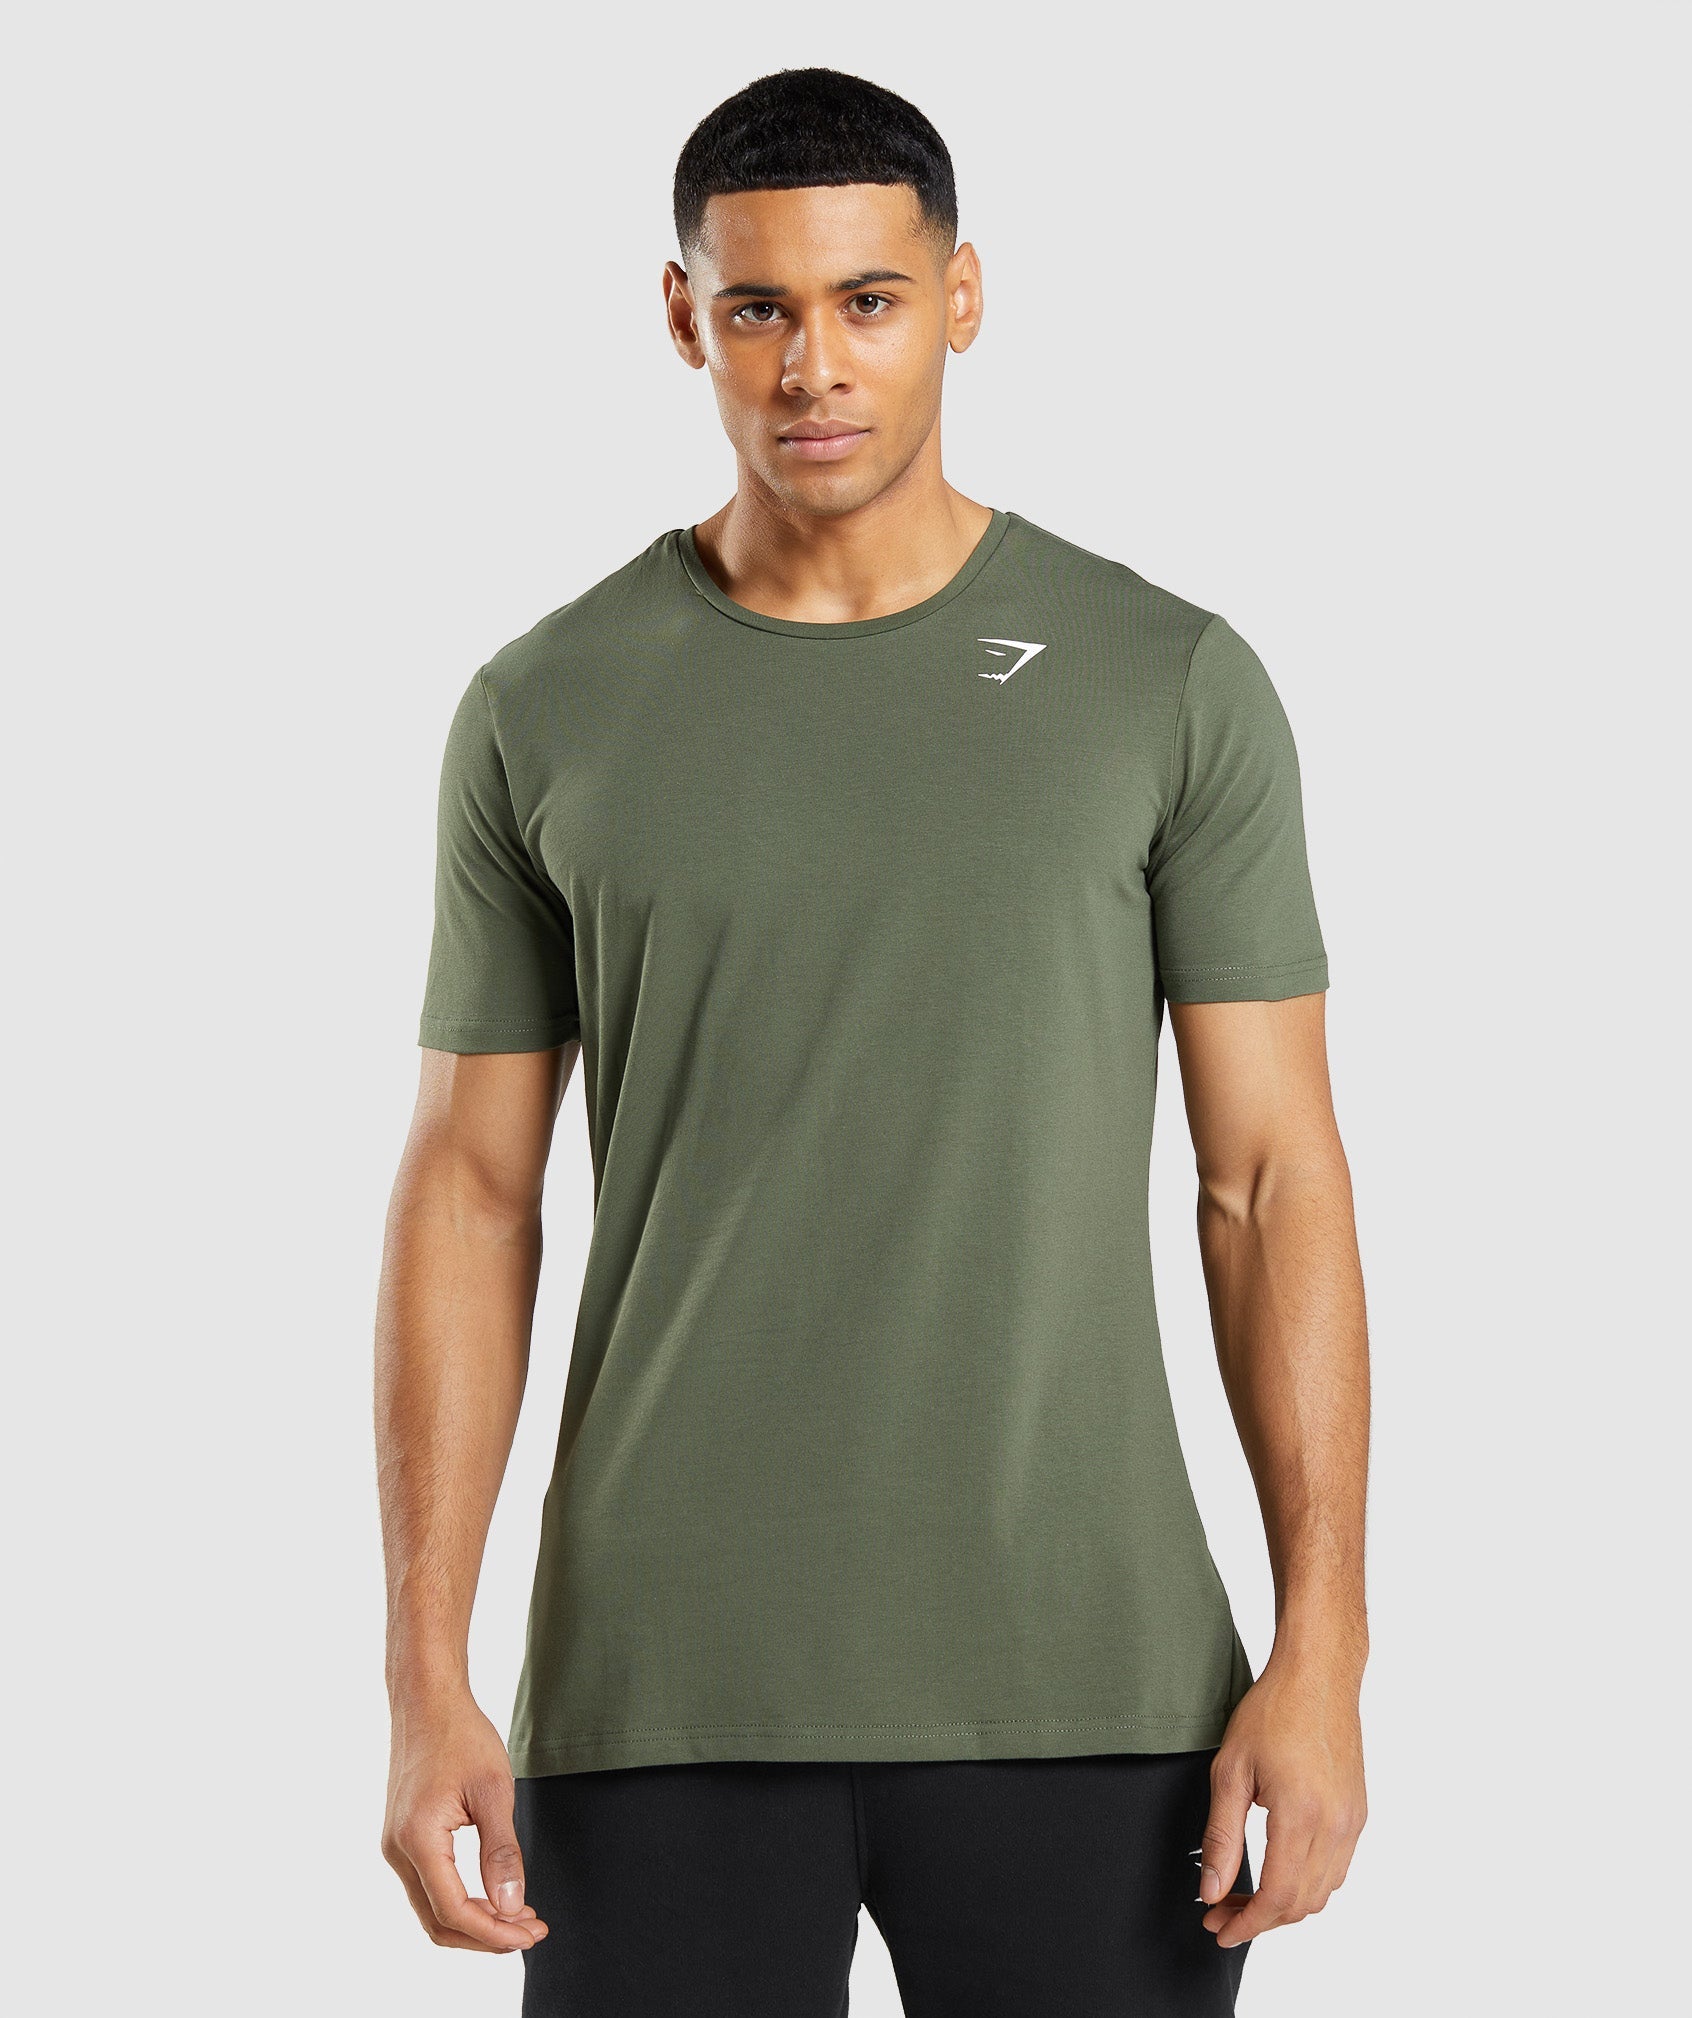 Essential T-Shirt in Core Olive - view 1